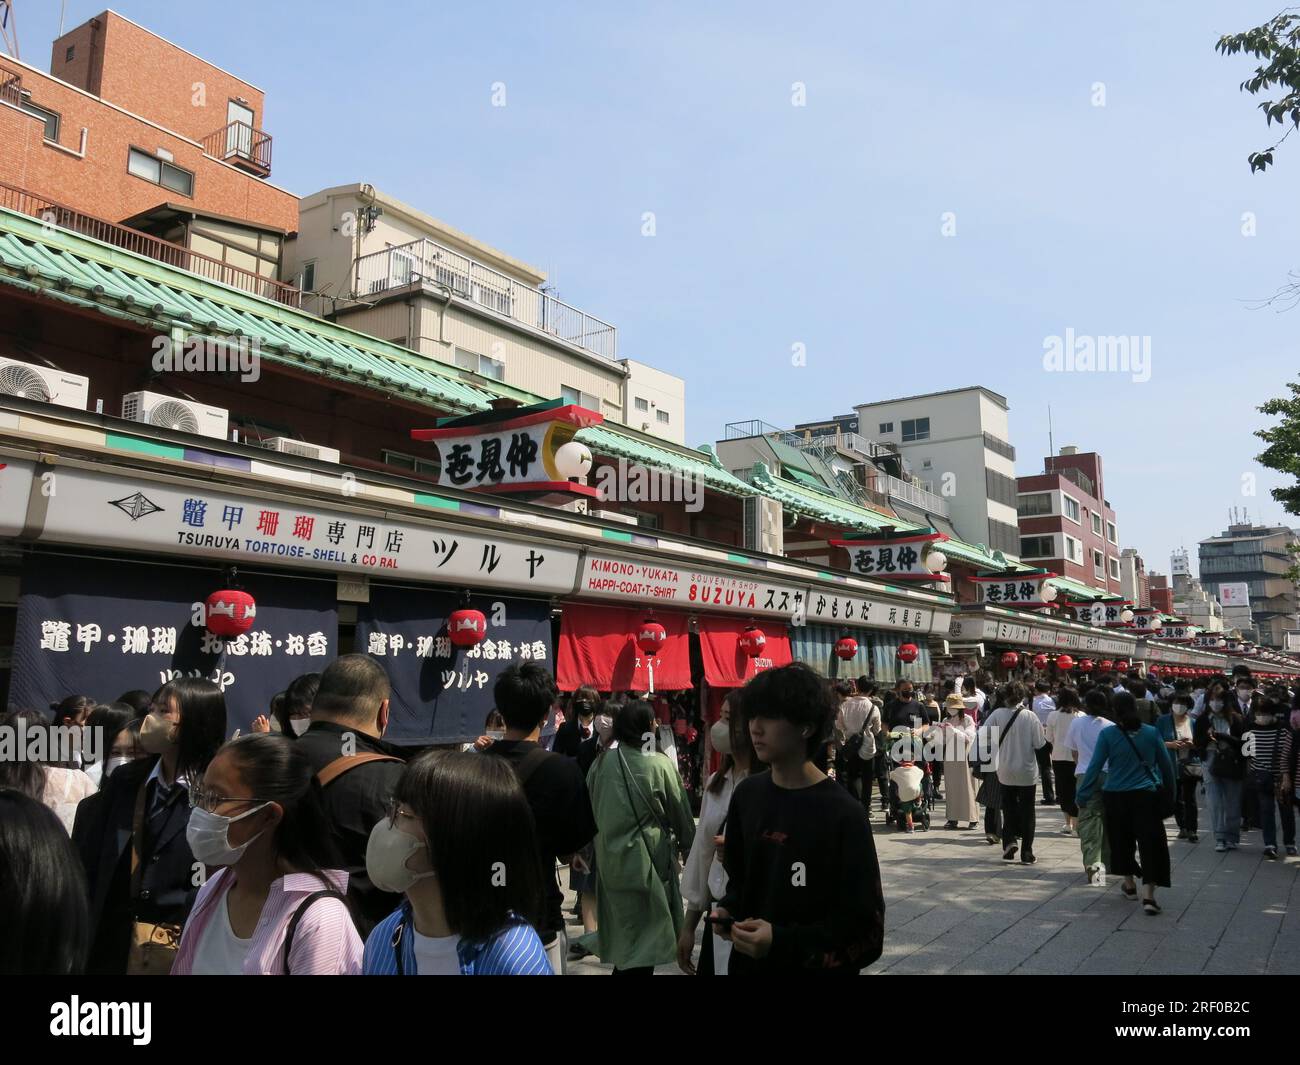 Crowds of tourists & visitors throng the streets surrounding the Senso-ji Temple which are filled with stalls & booths selling souvenirs & sweets. Stock Photo